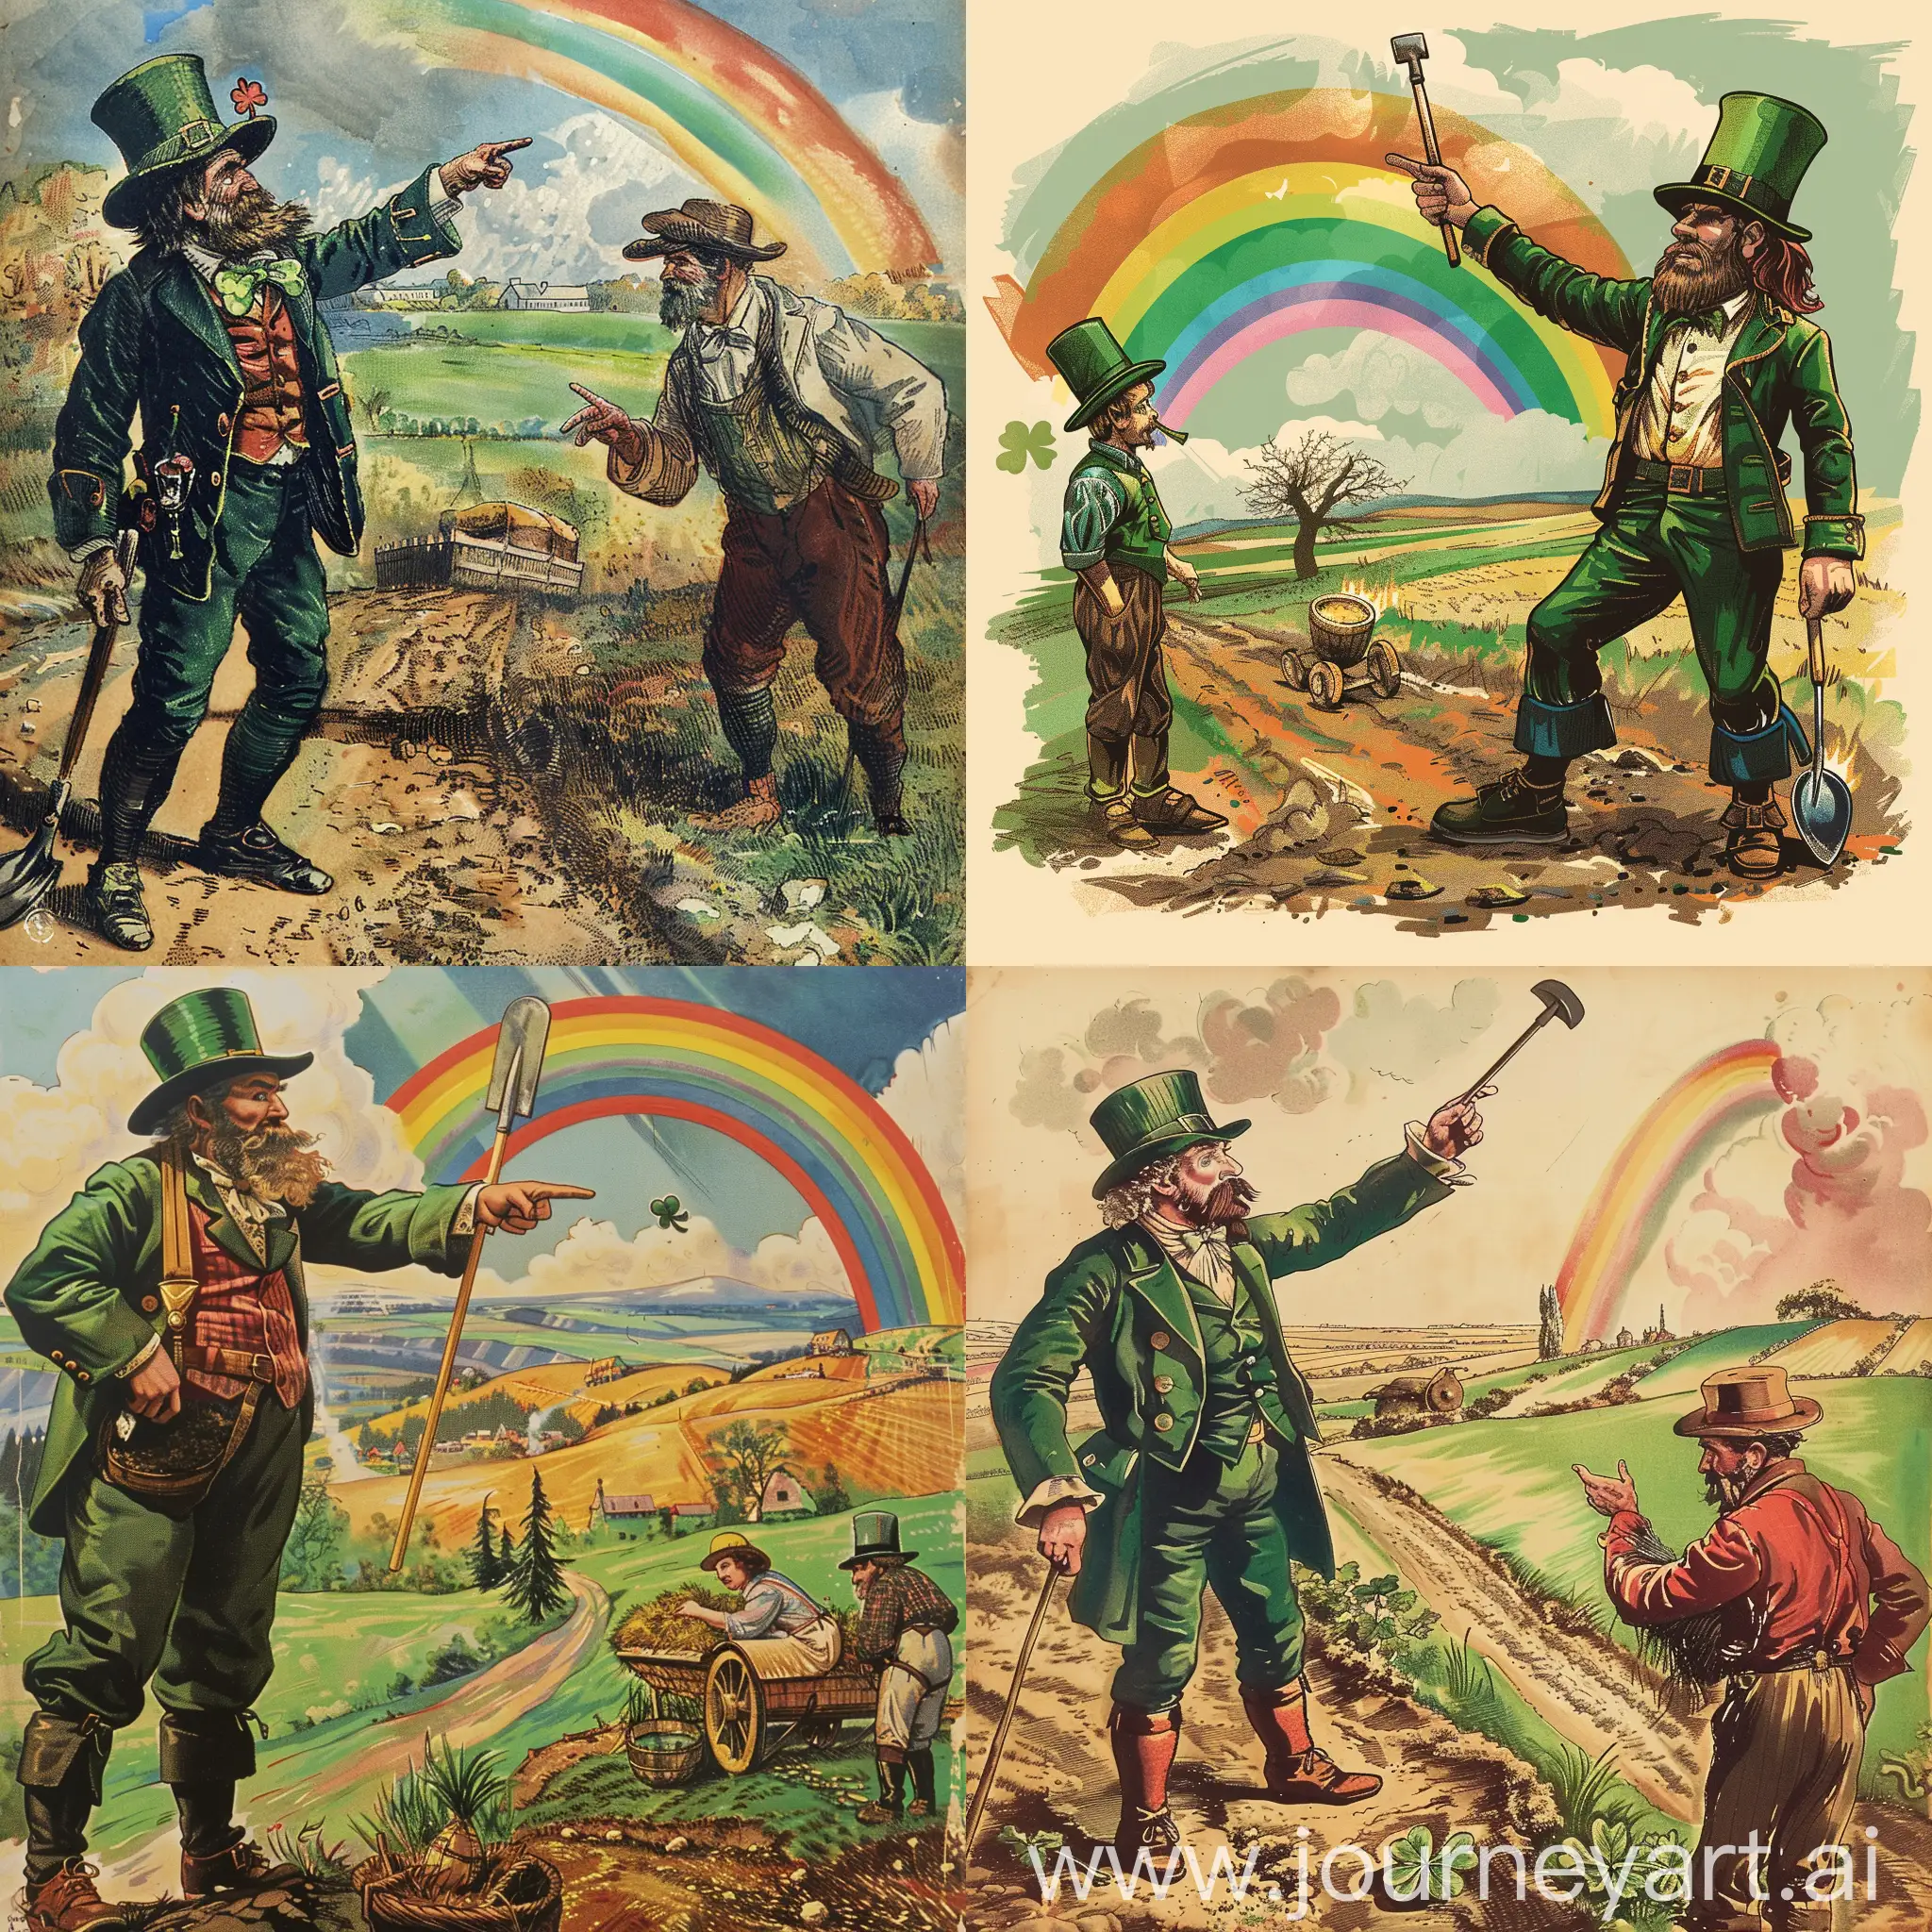 Irish Leprechaun with spade in hand pointing to Rainbow and confused farmer.